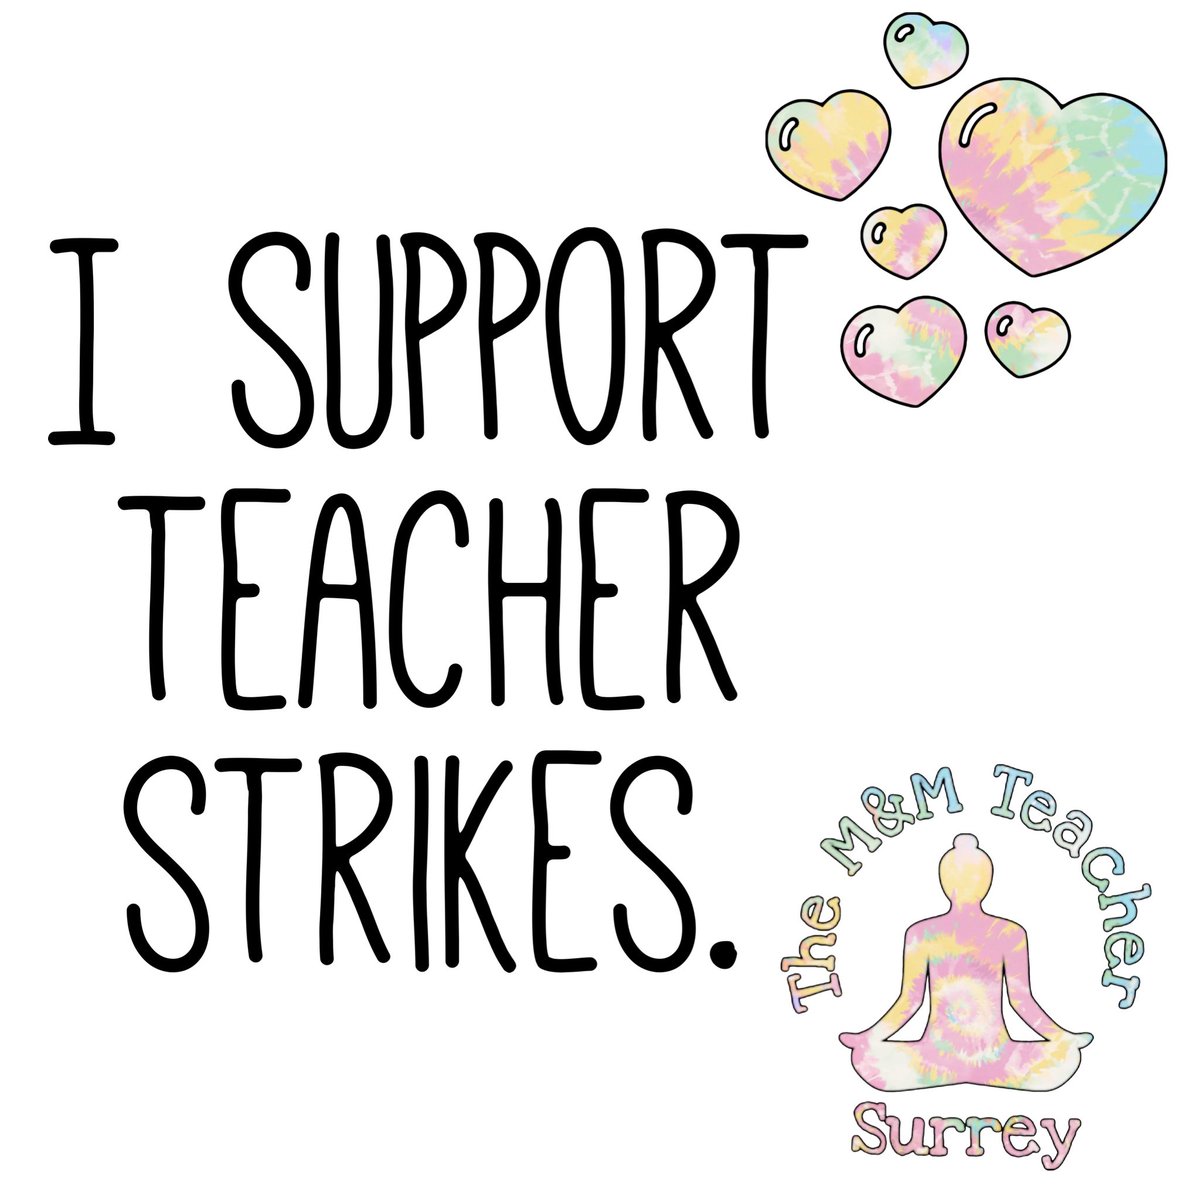 I am saddened by all the negativity I have seen on Twitter toward teachers who are striking.
Teachers are human beings.
They deserve fair pay, appropriate resources, respect and kindness.
#teacherstrikes #edutwitter #bekind #ukteachers